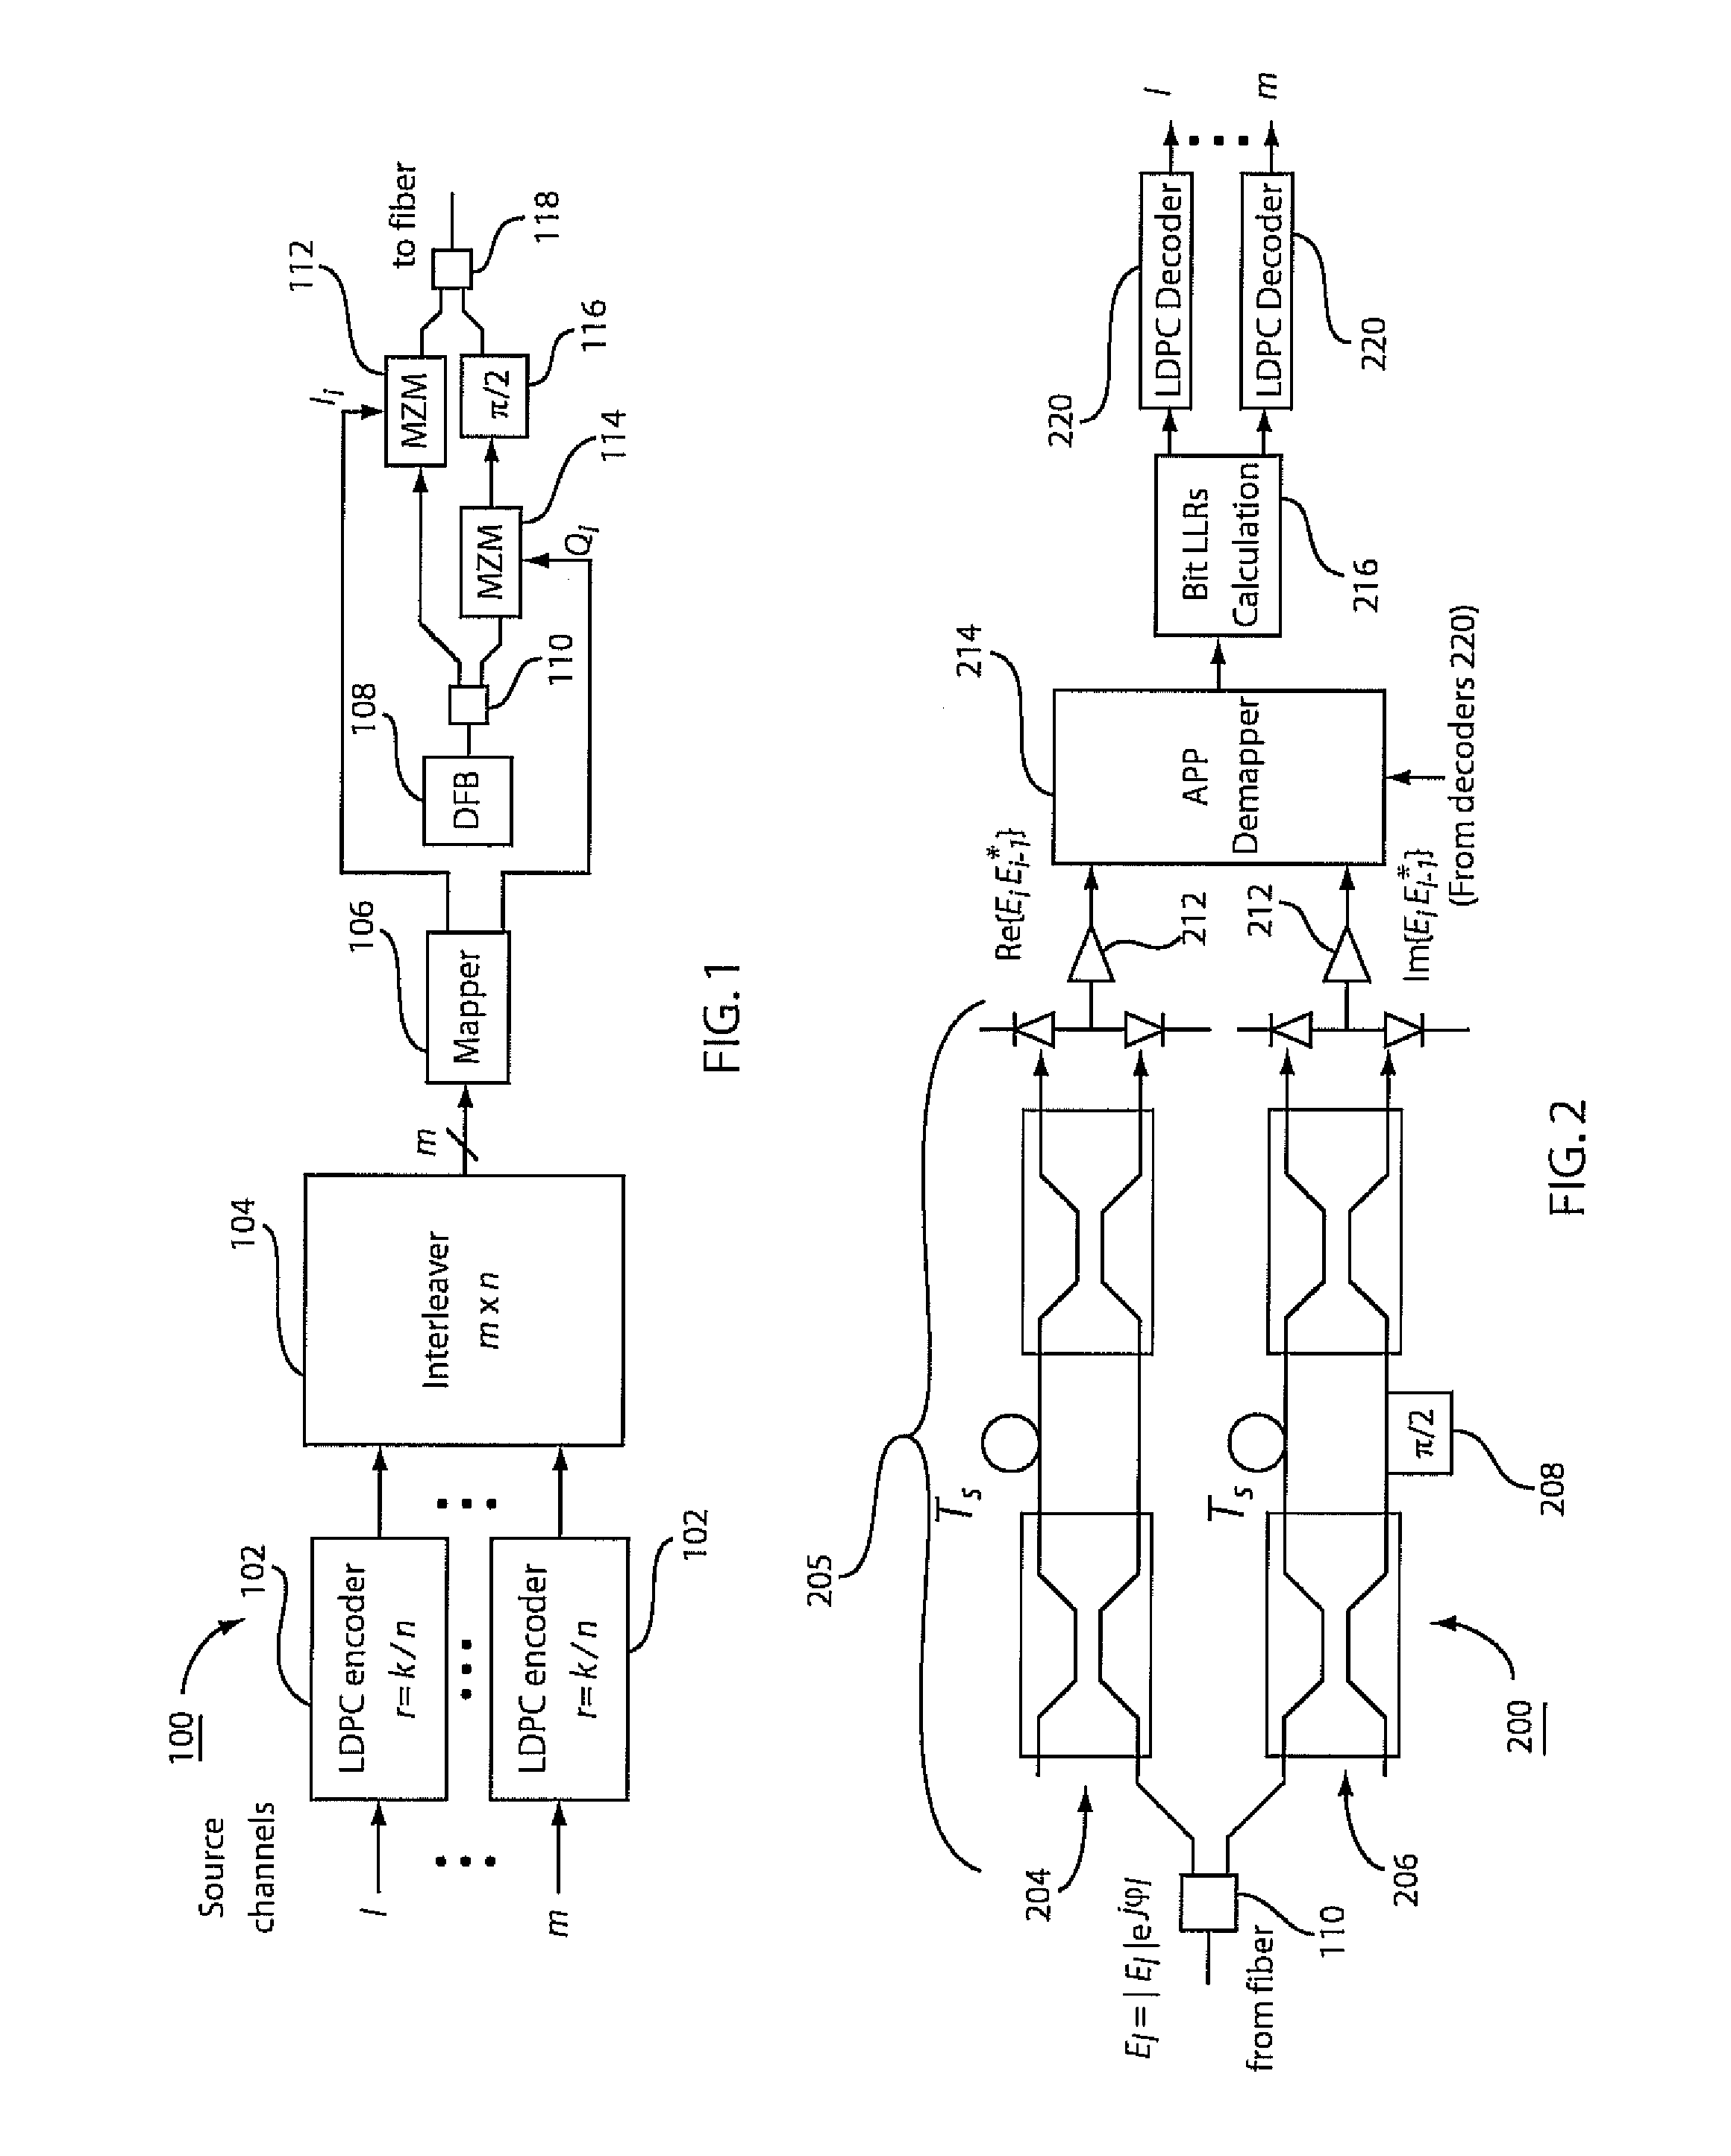 Bit-interleaved ldpc-coded modulation for high-speed optical transmission